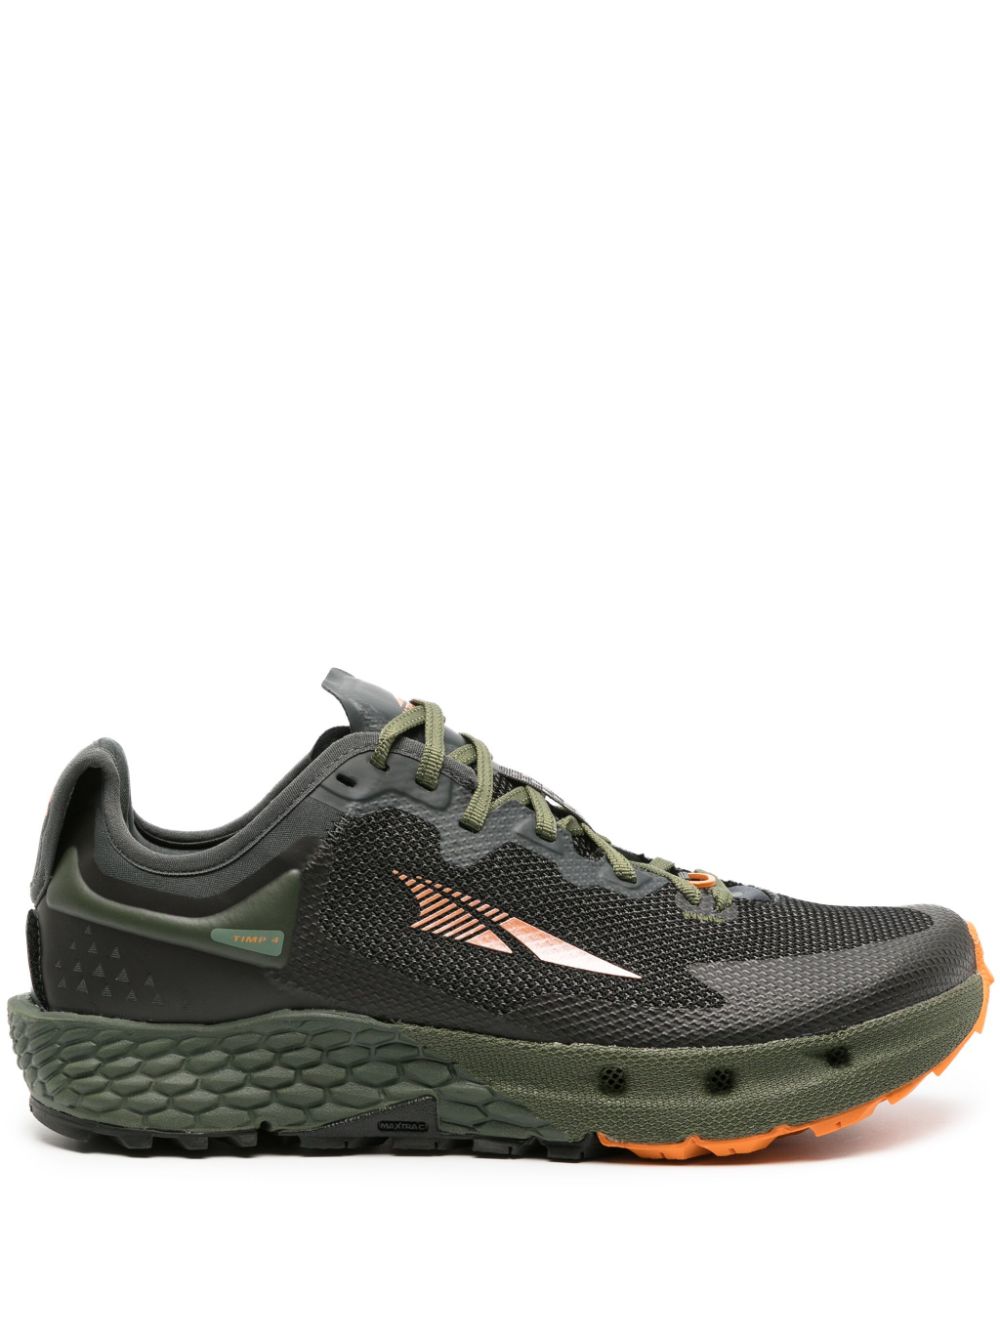 ALTRA TIMP 4 TRAIL SNEAKERS